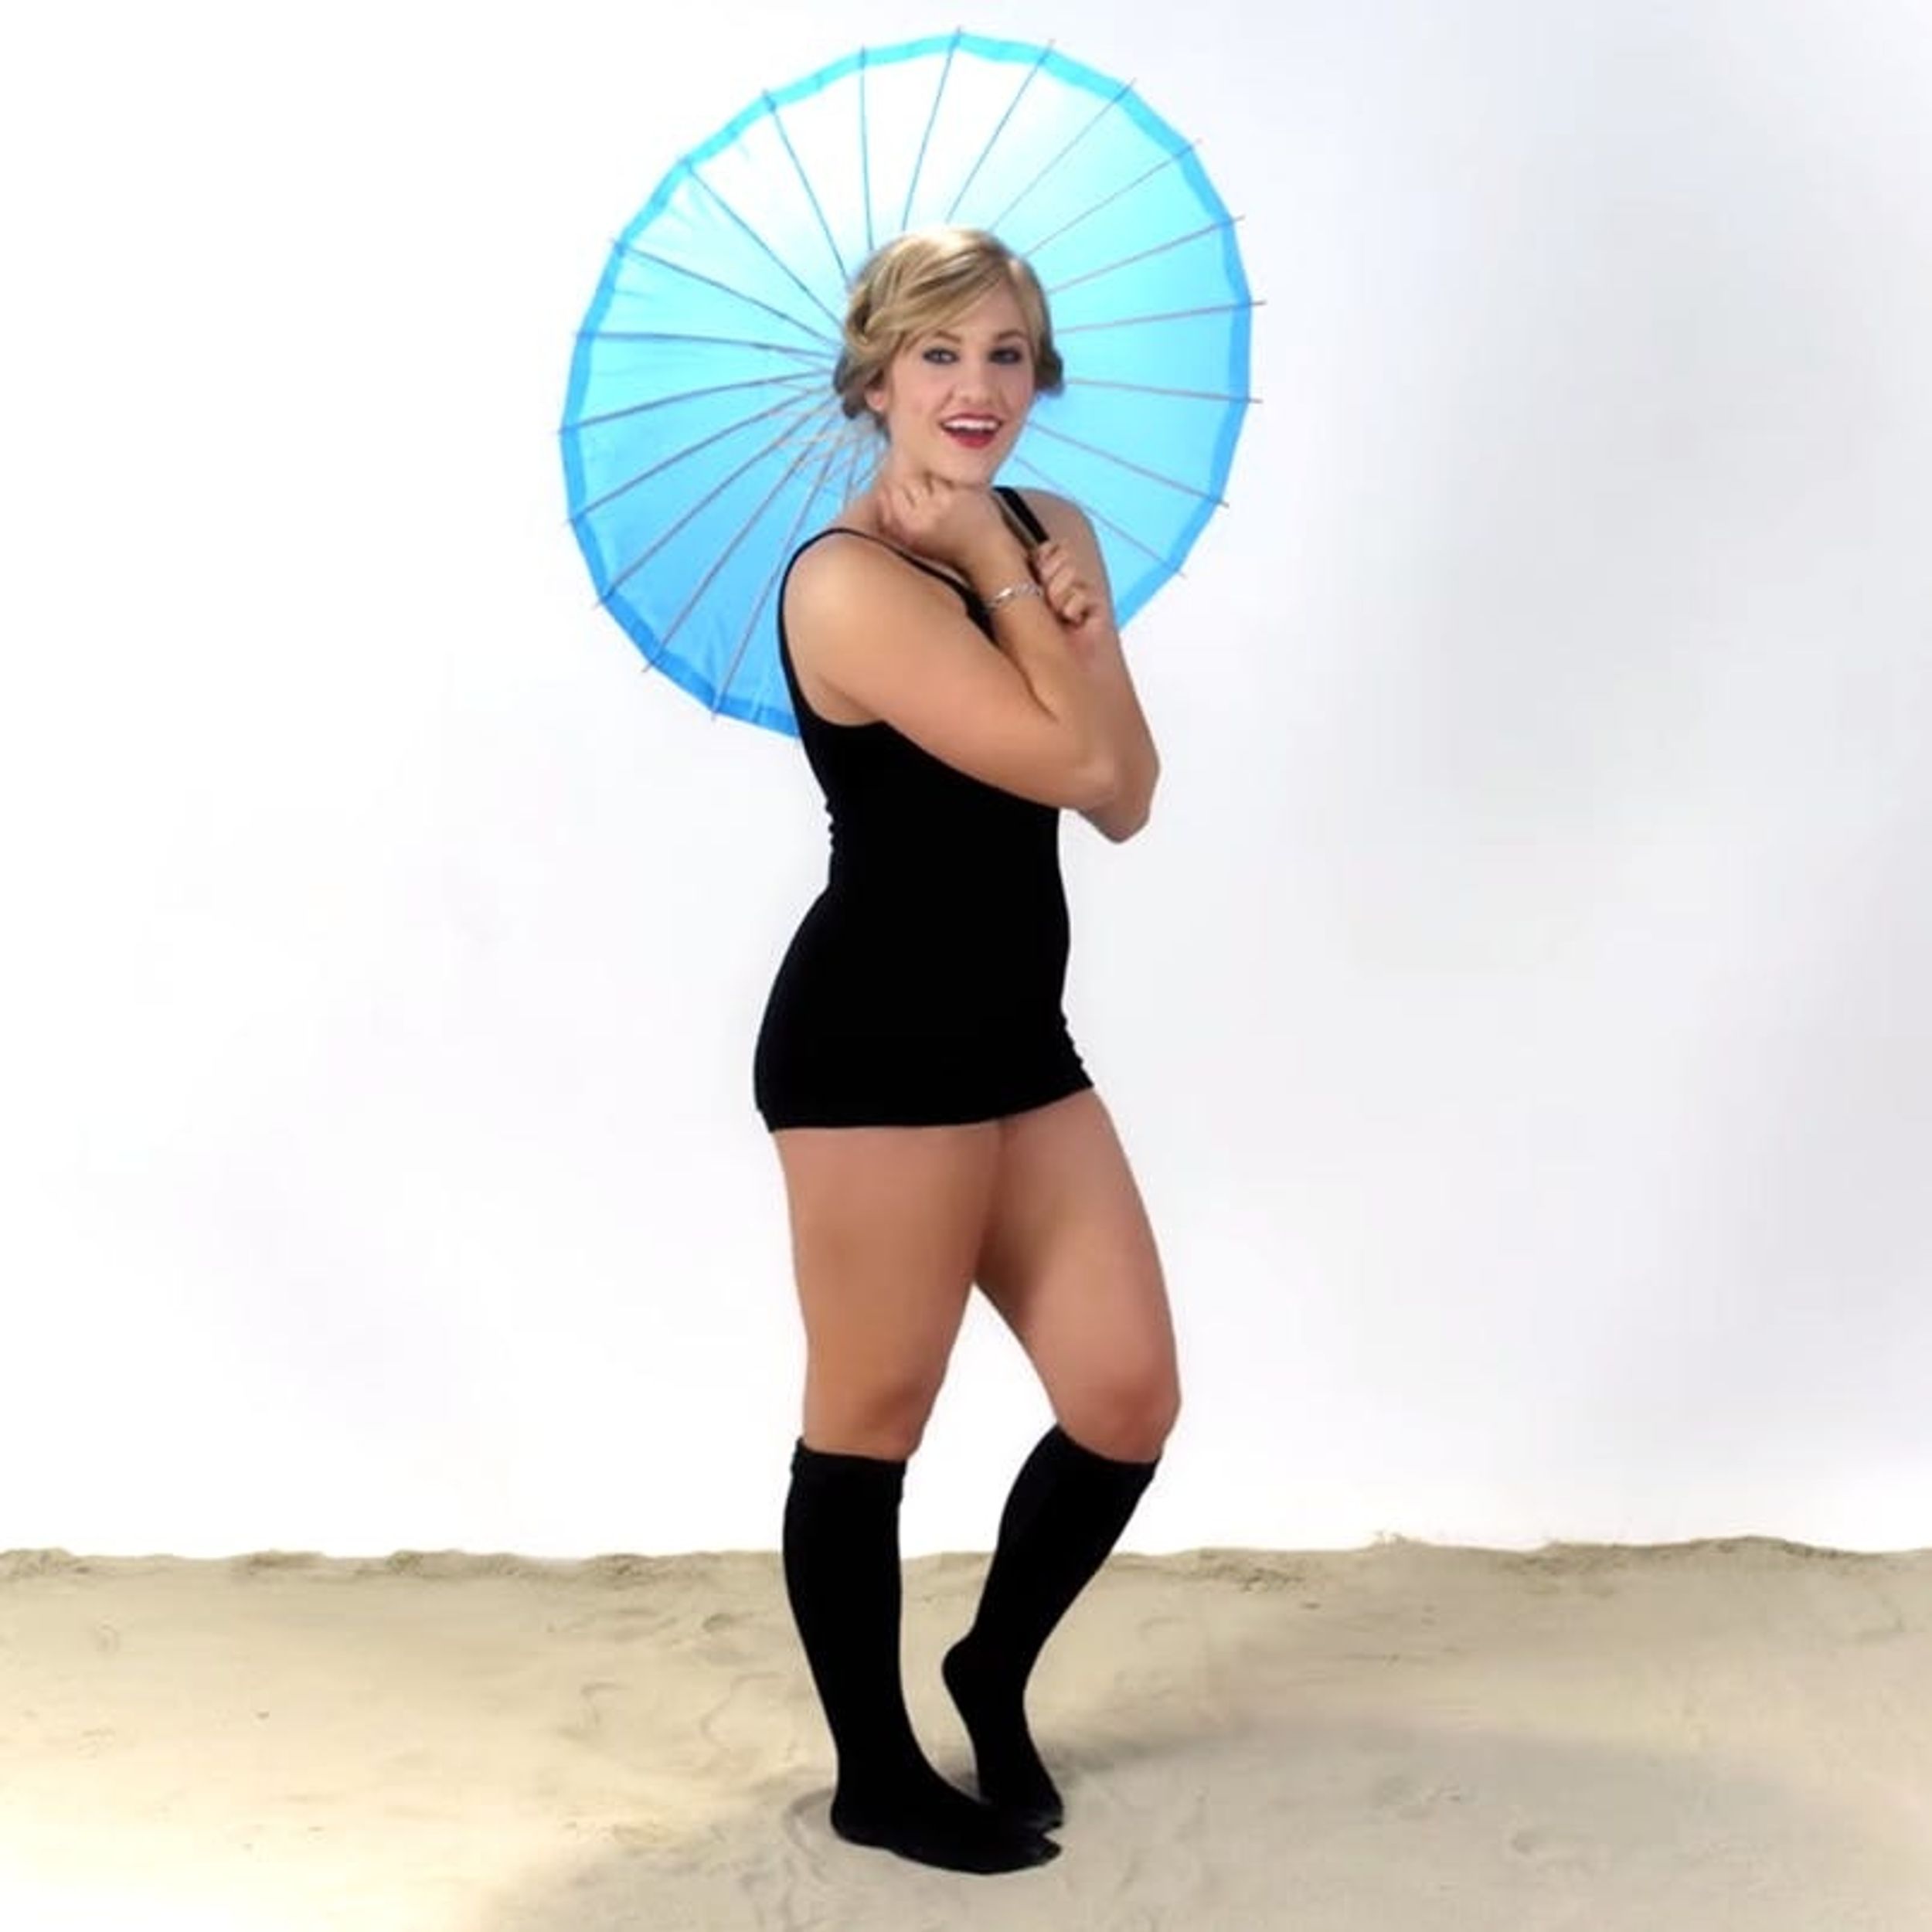 Watch: 100 Years of Swimsuit Fashion in Under 4 Minutes